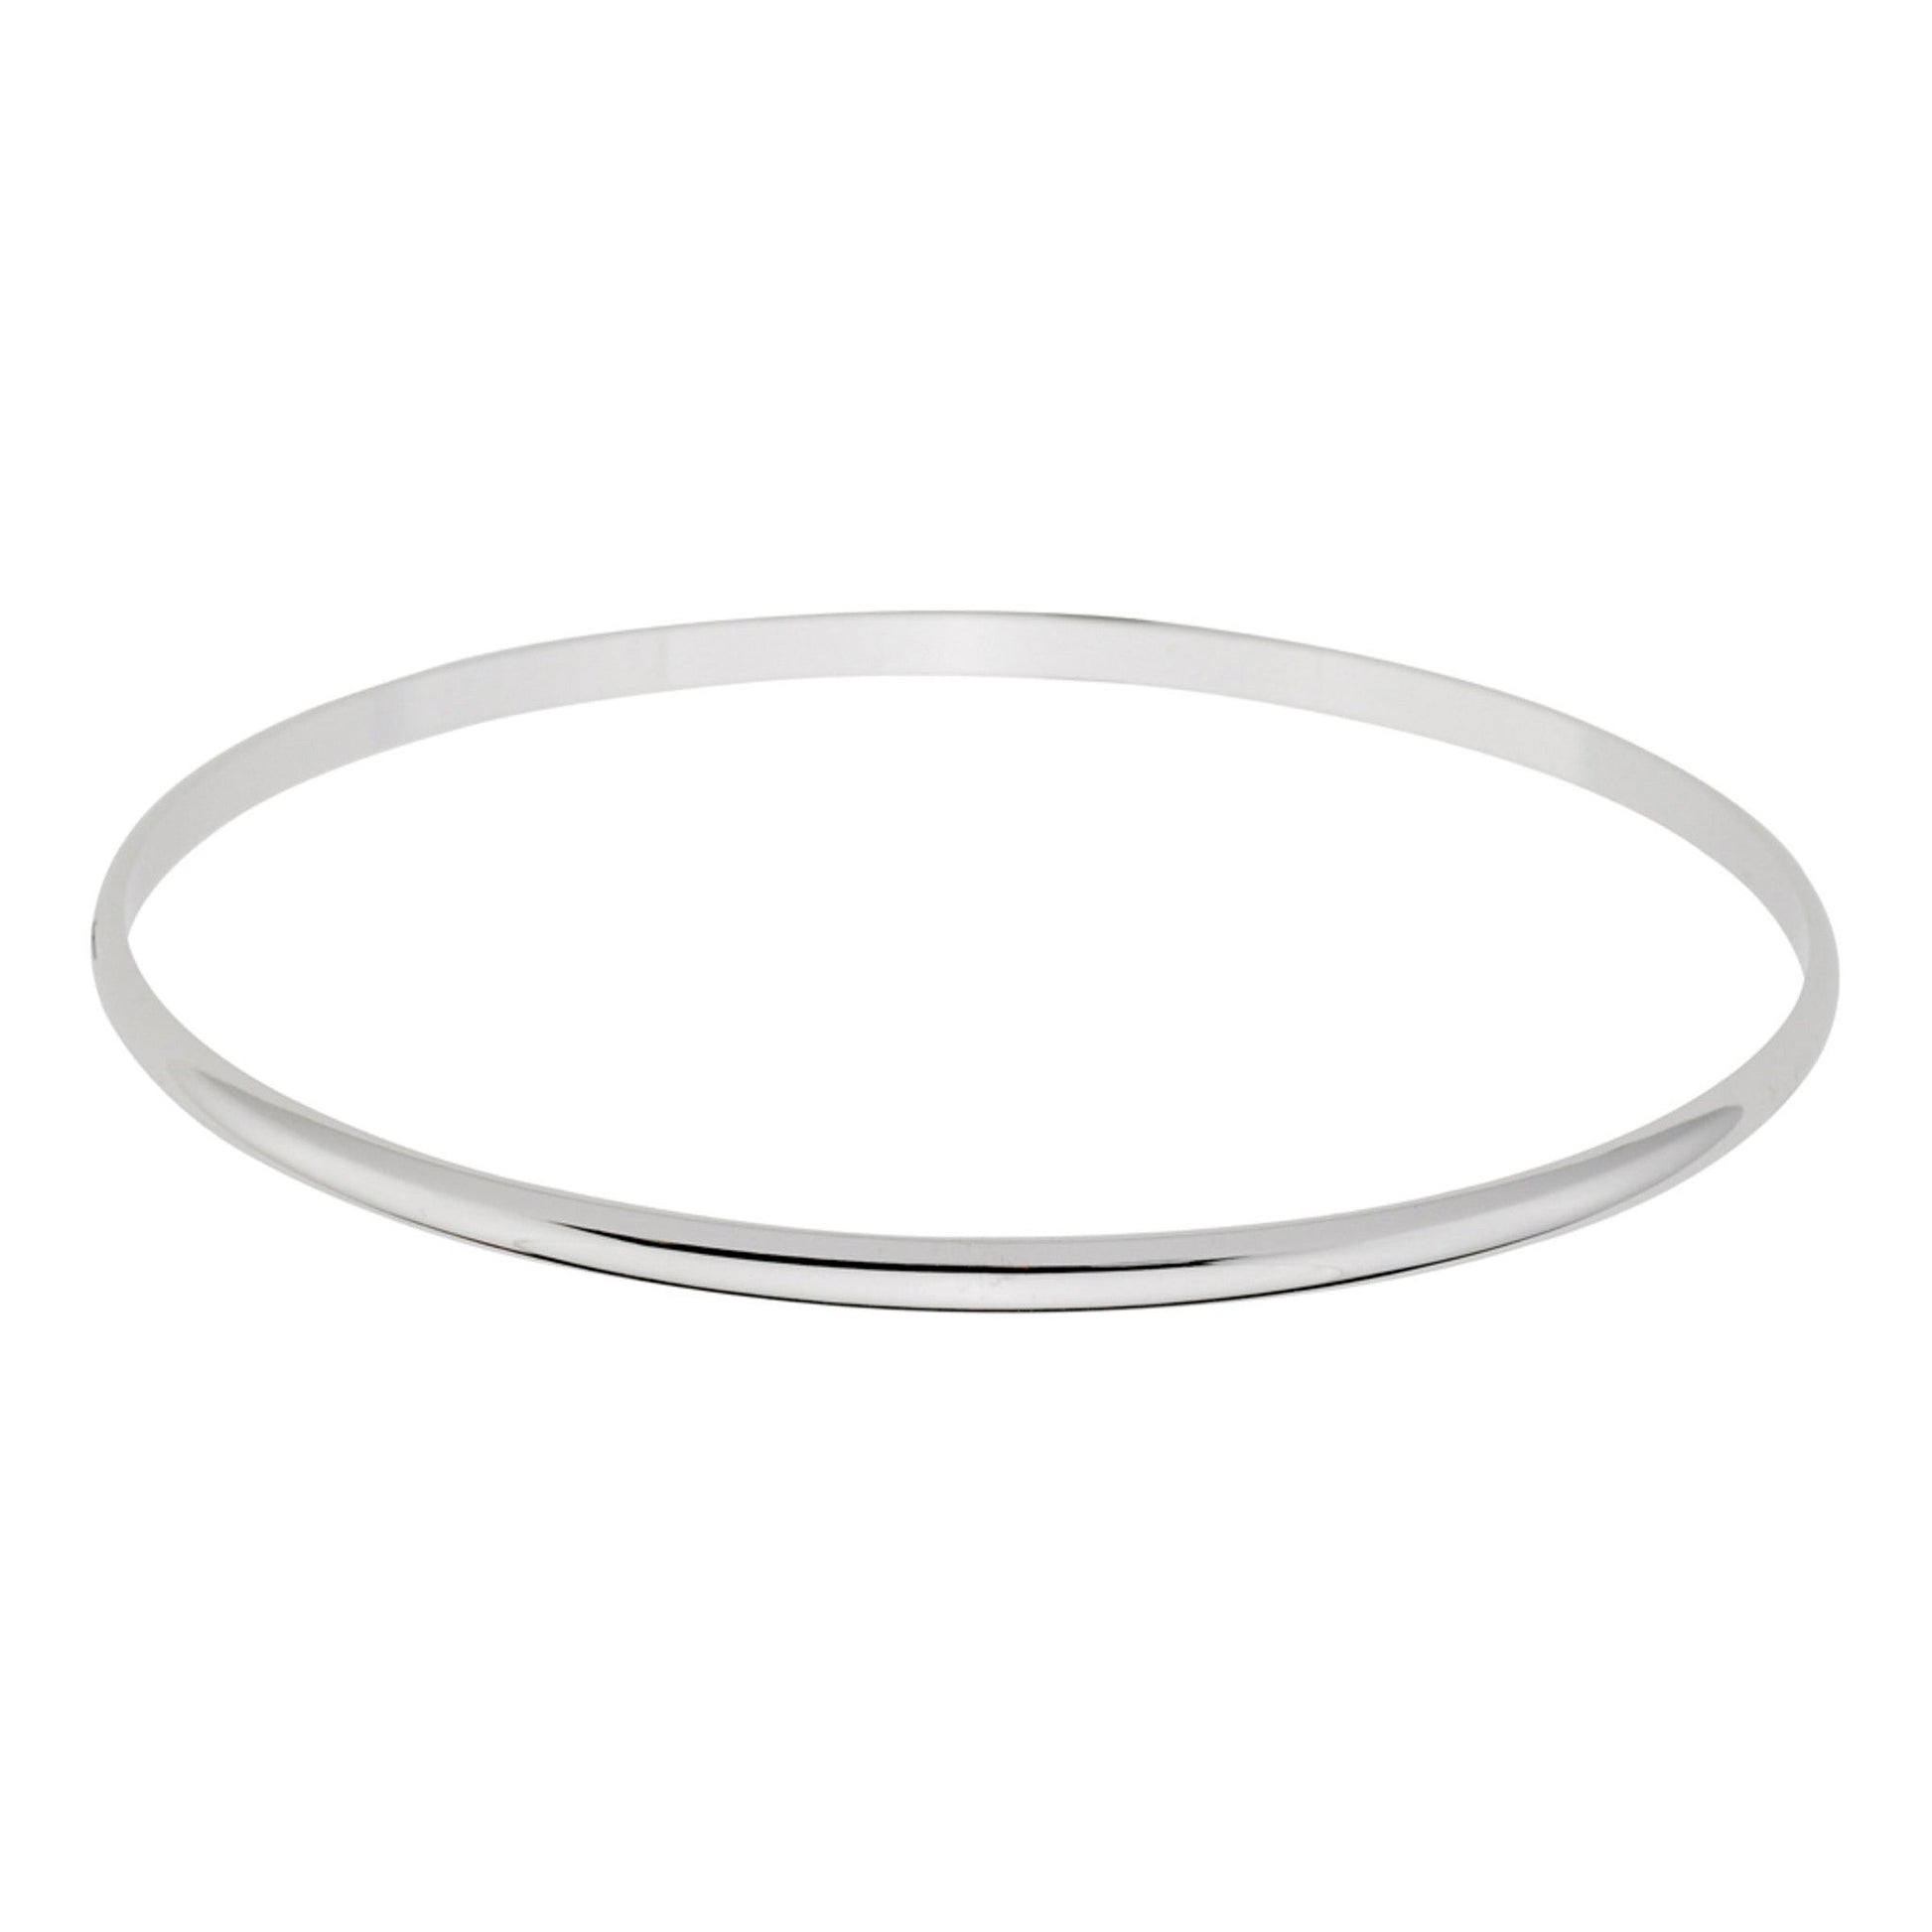 A 1/8" extra large bangle bracelet displayed on a neutral white background.